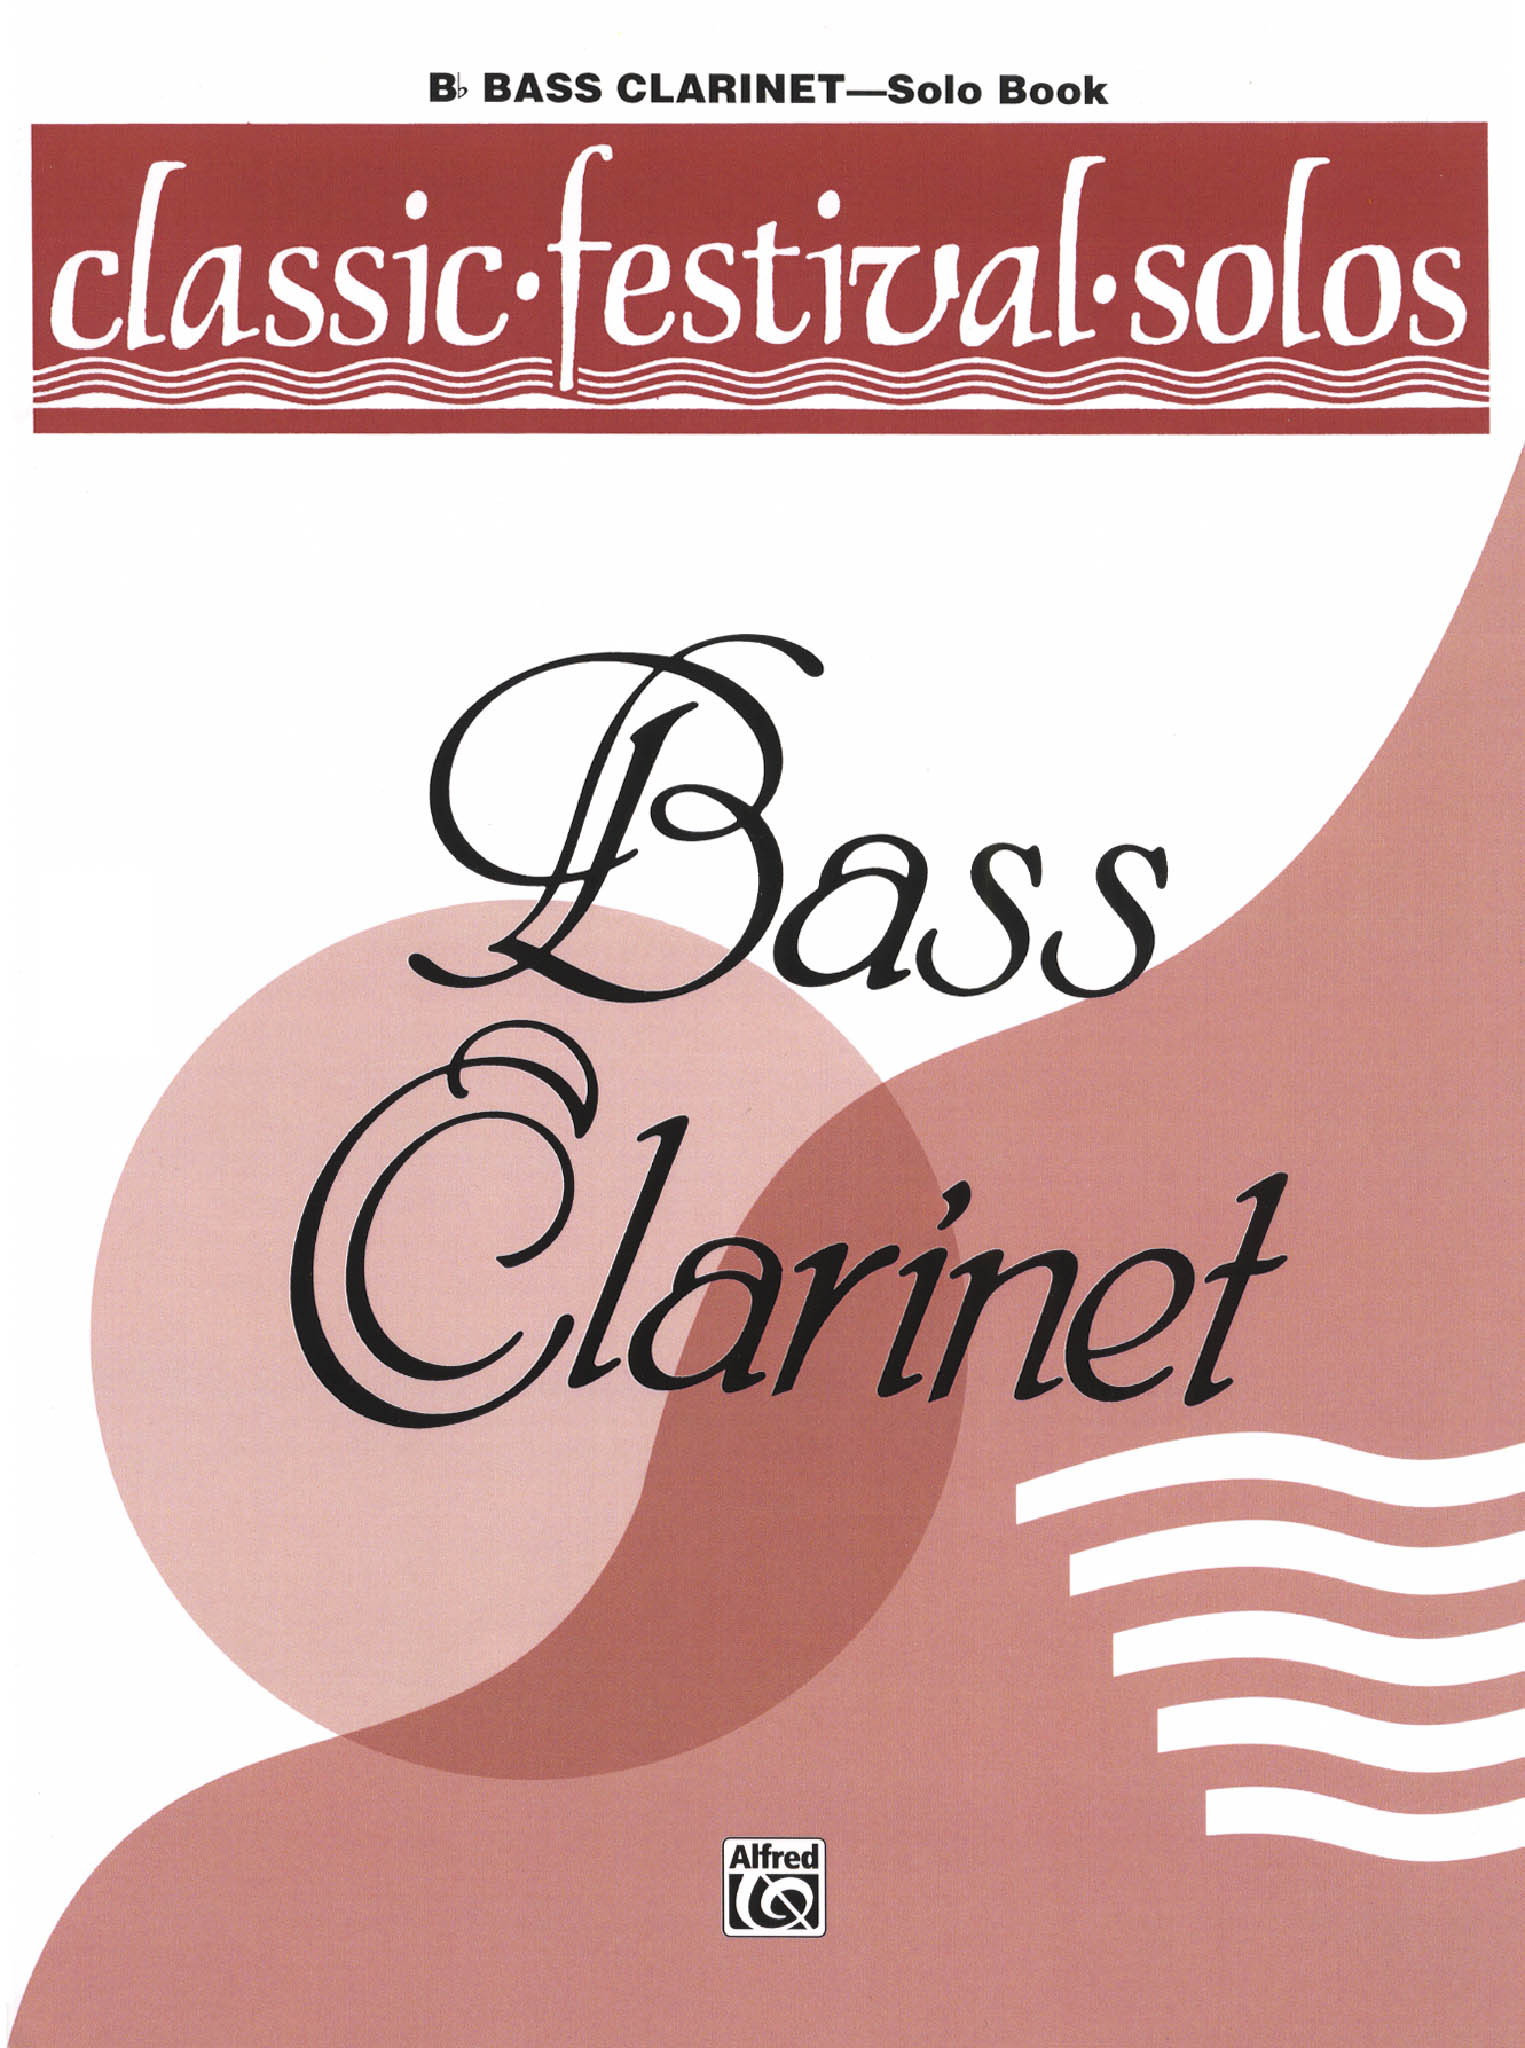 Belwin Classic Festival Solos Bass Clarinet